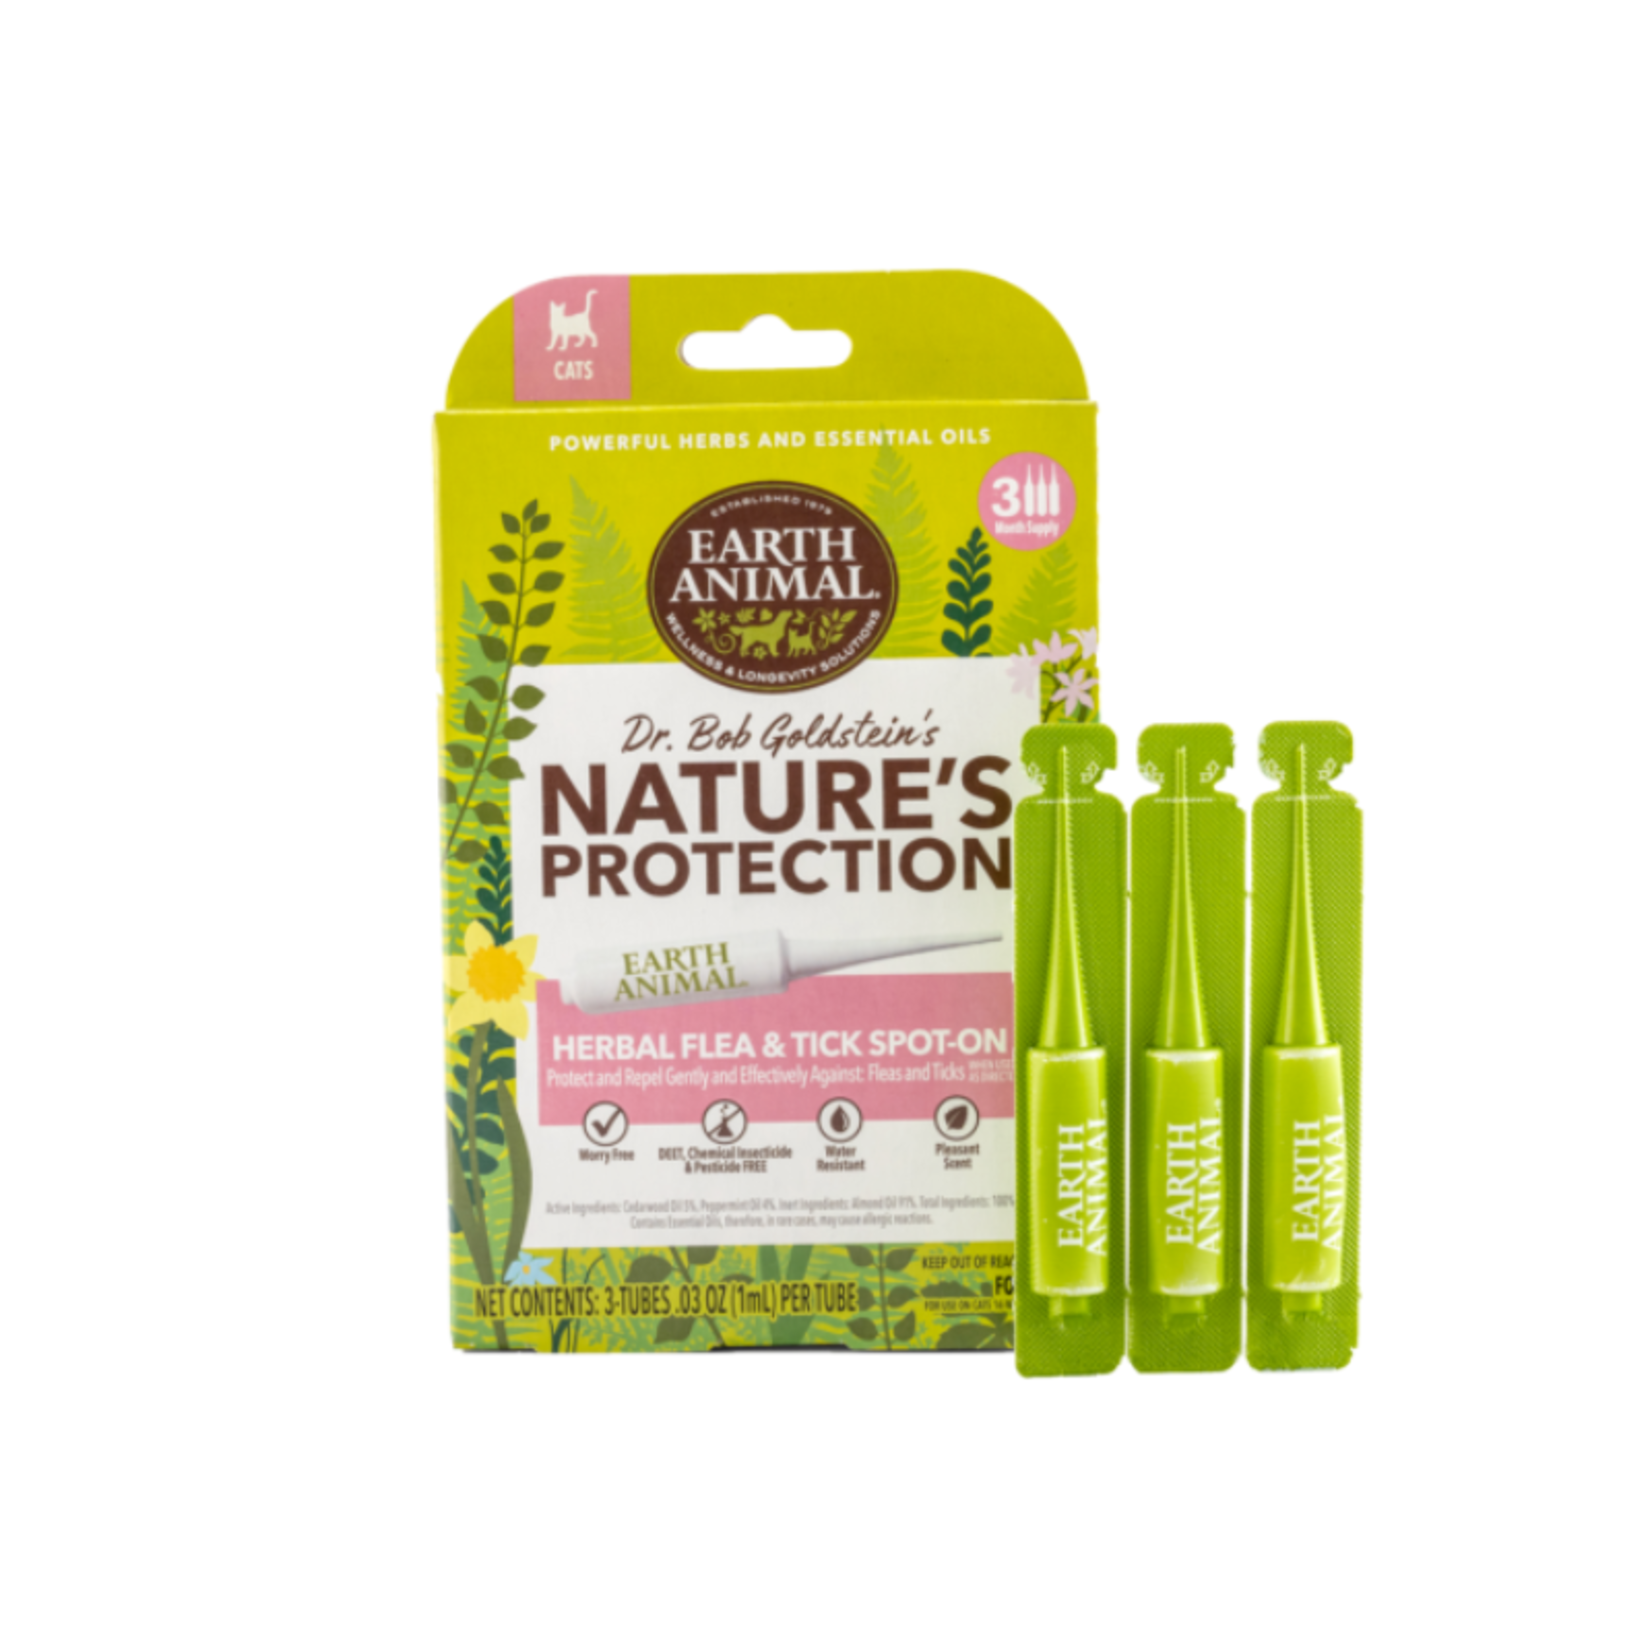 Earth Animal Cat - 3 Tubes - Herbal Flea & Tick Spot-On - Nature’s Protection / Earth Animal